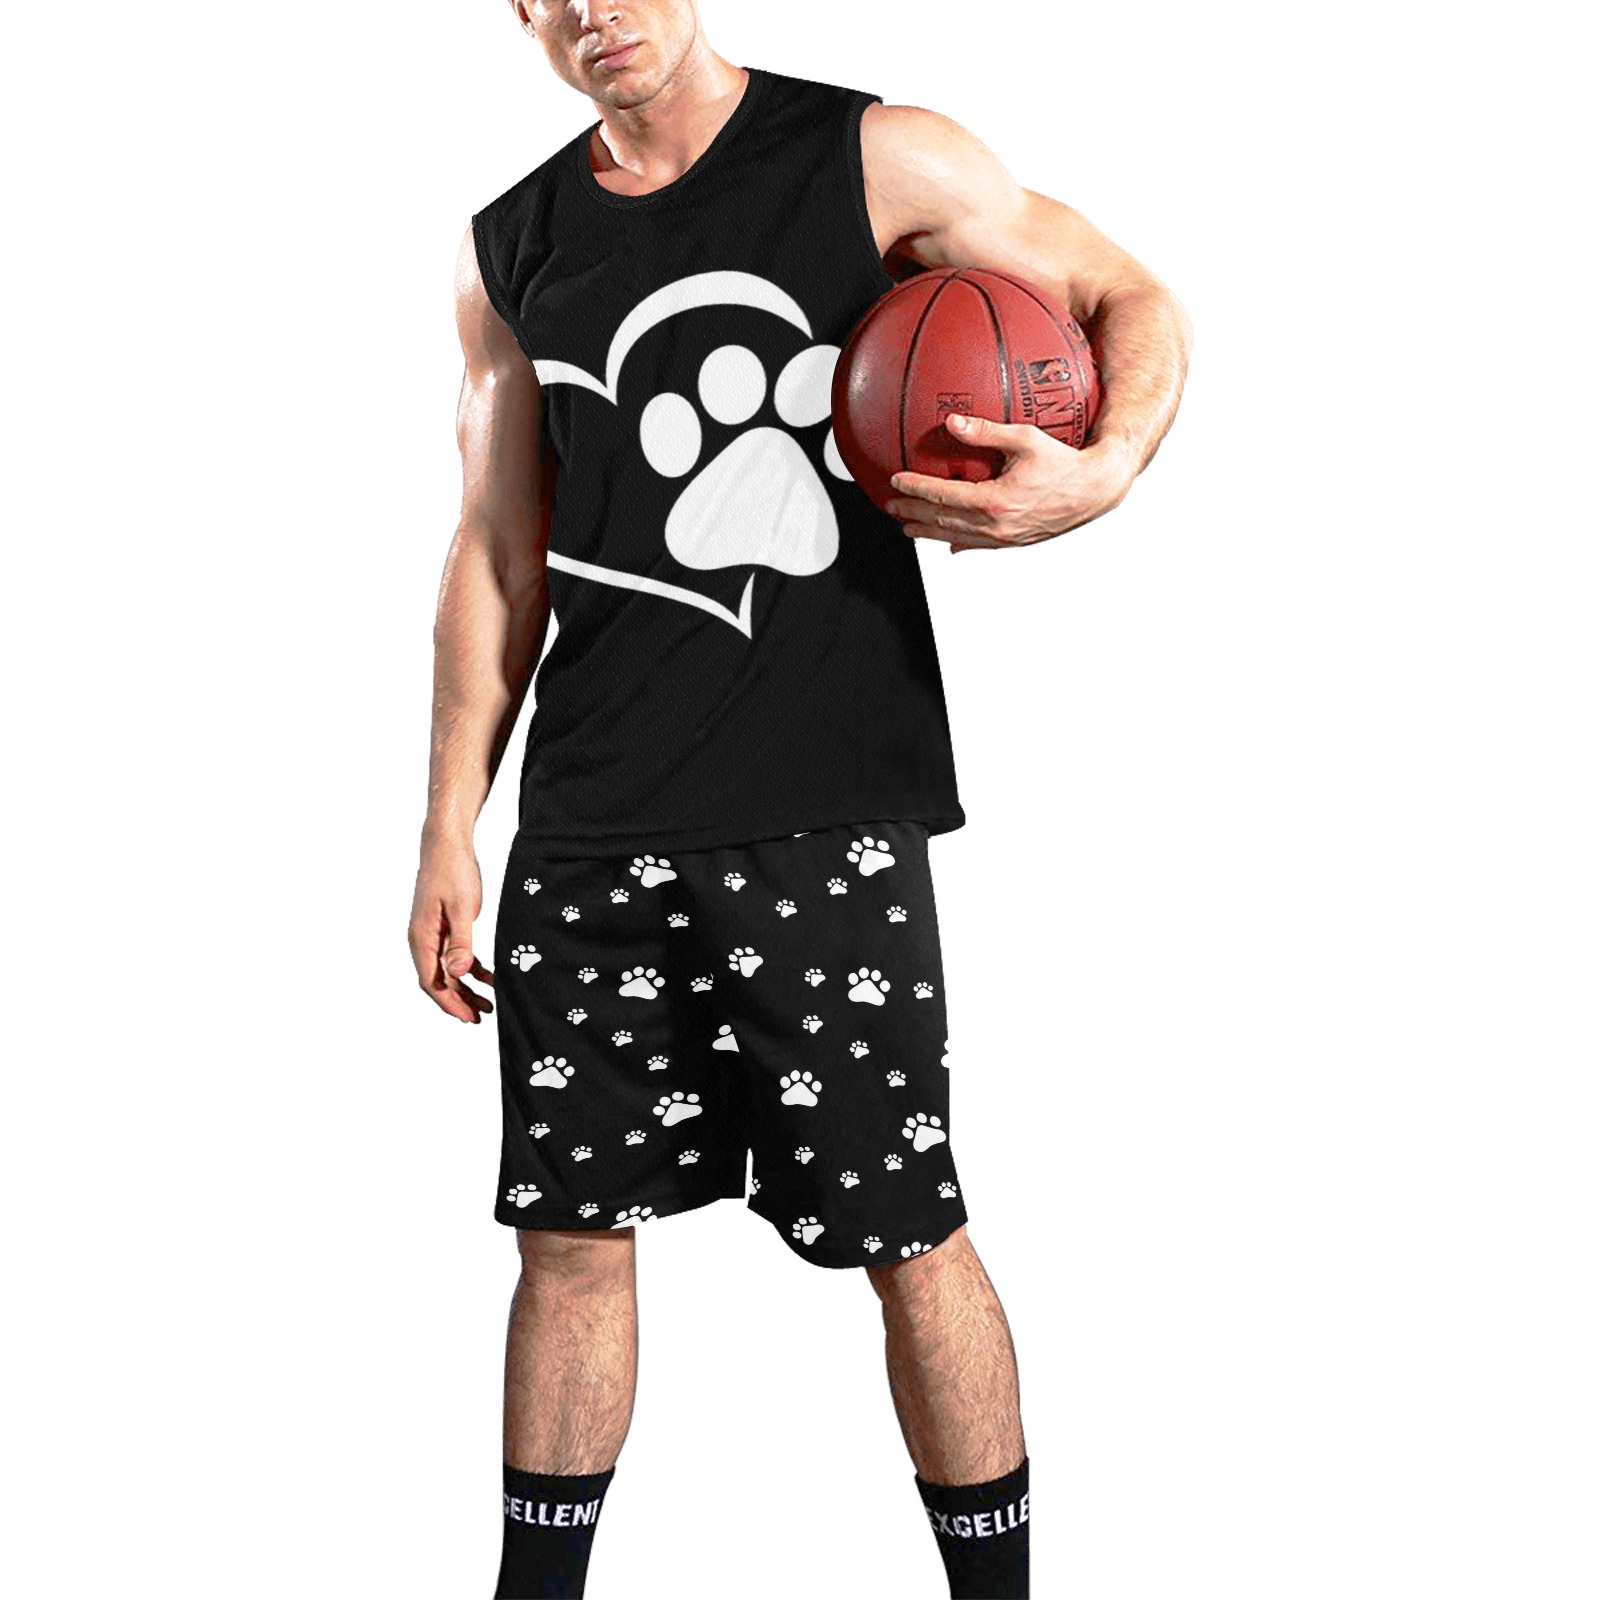 Puppy Style by Fetishworld All Over Print Basketball Uniform